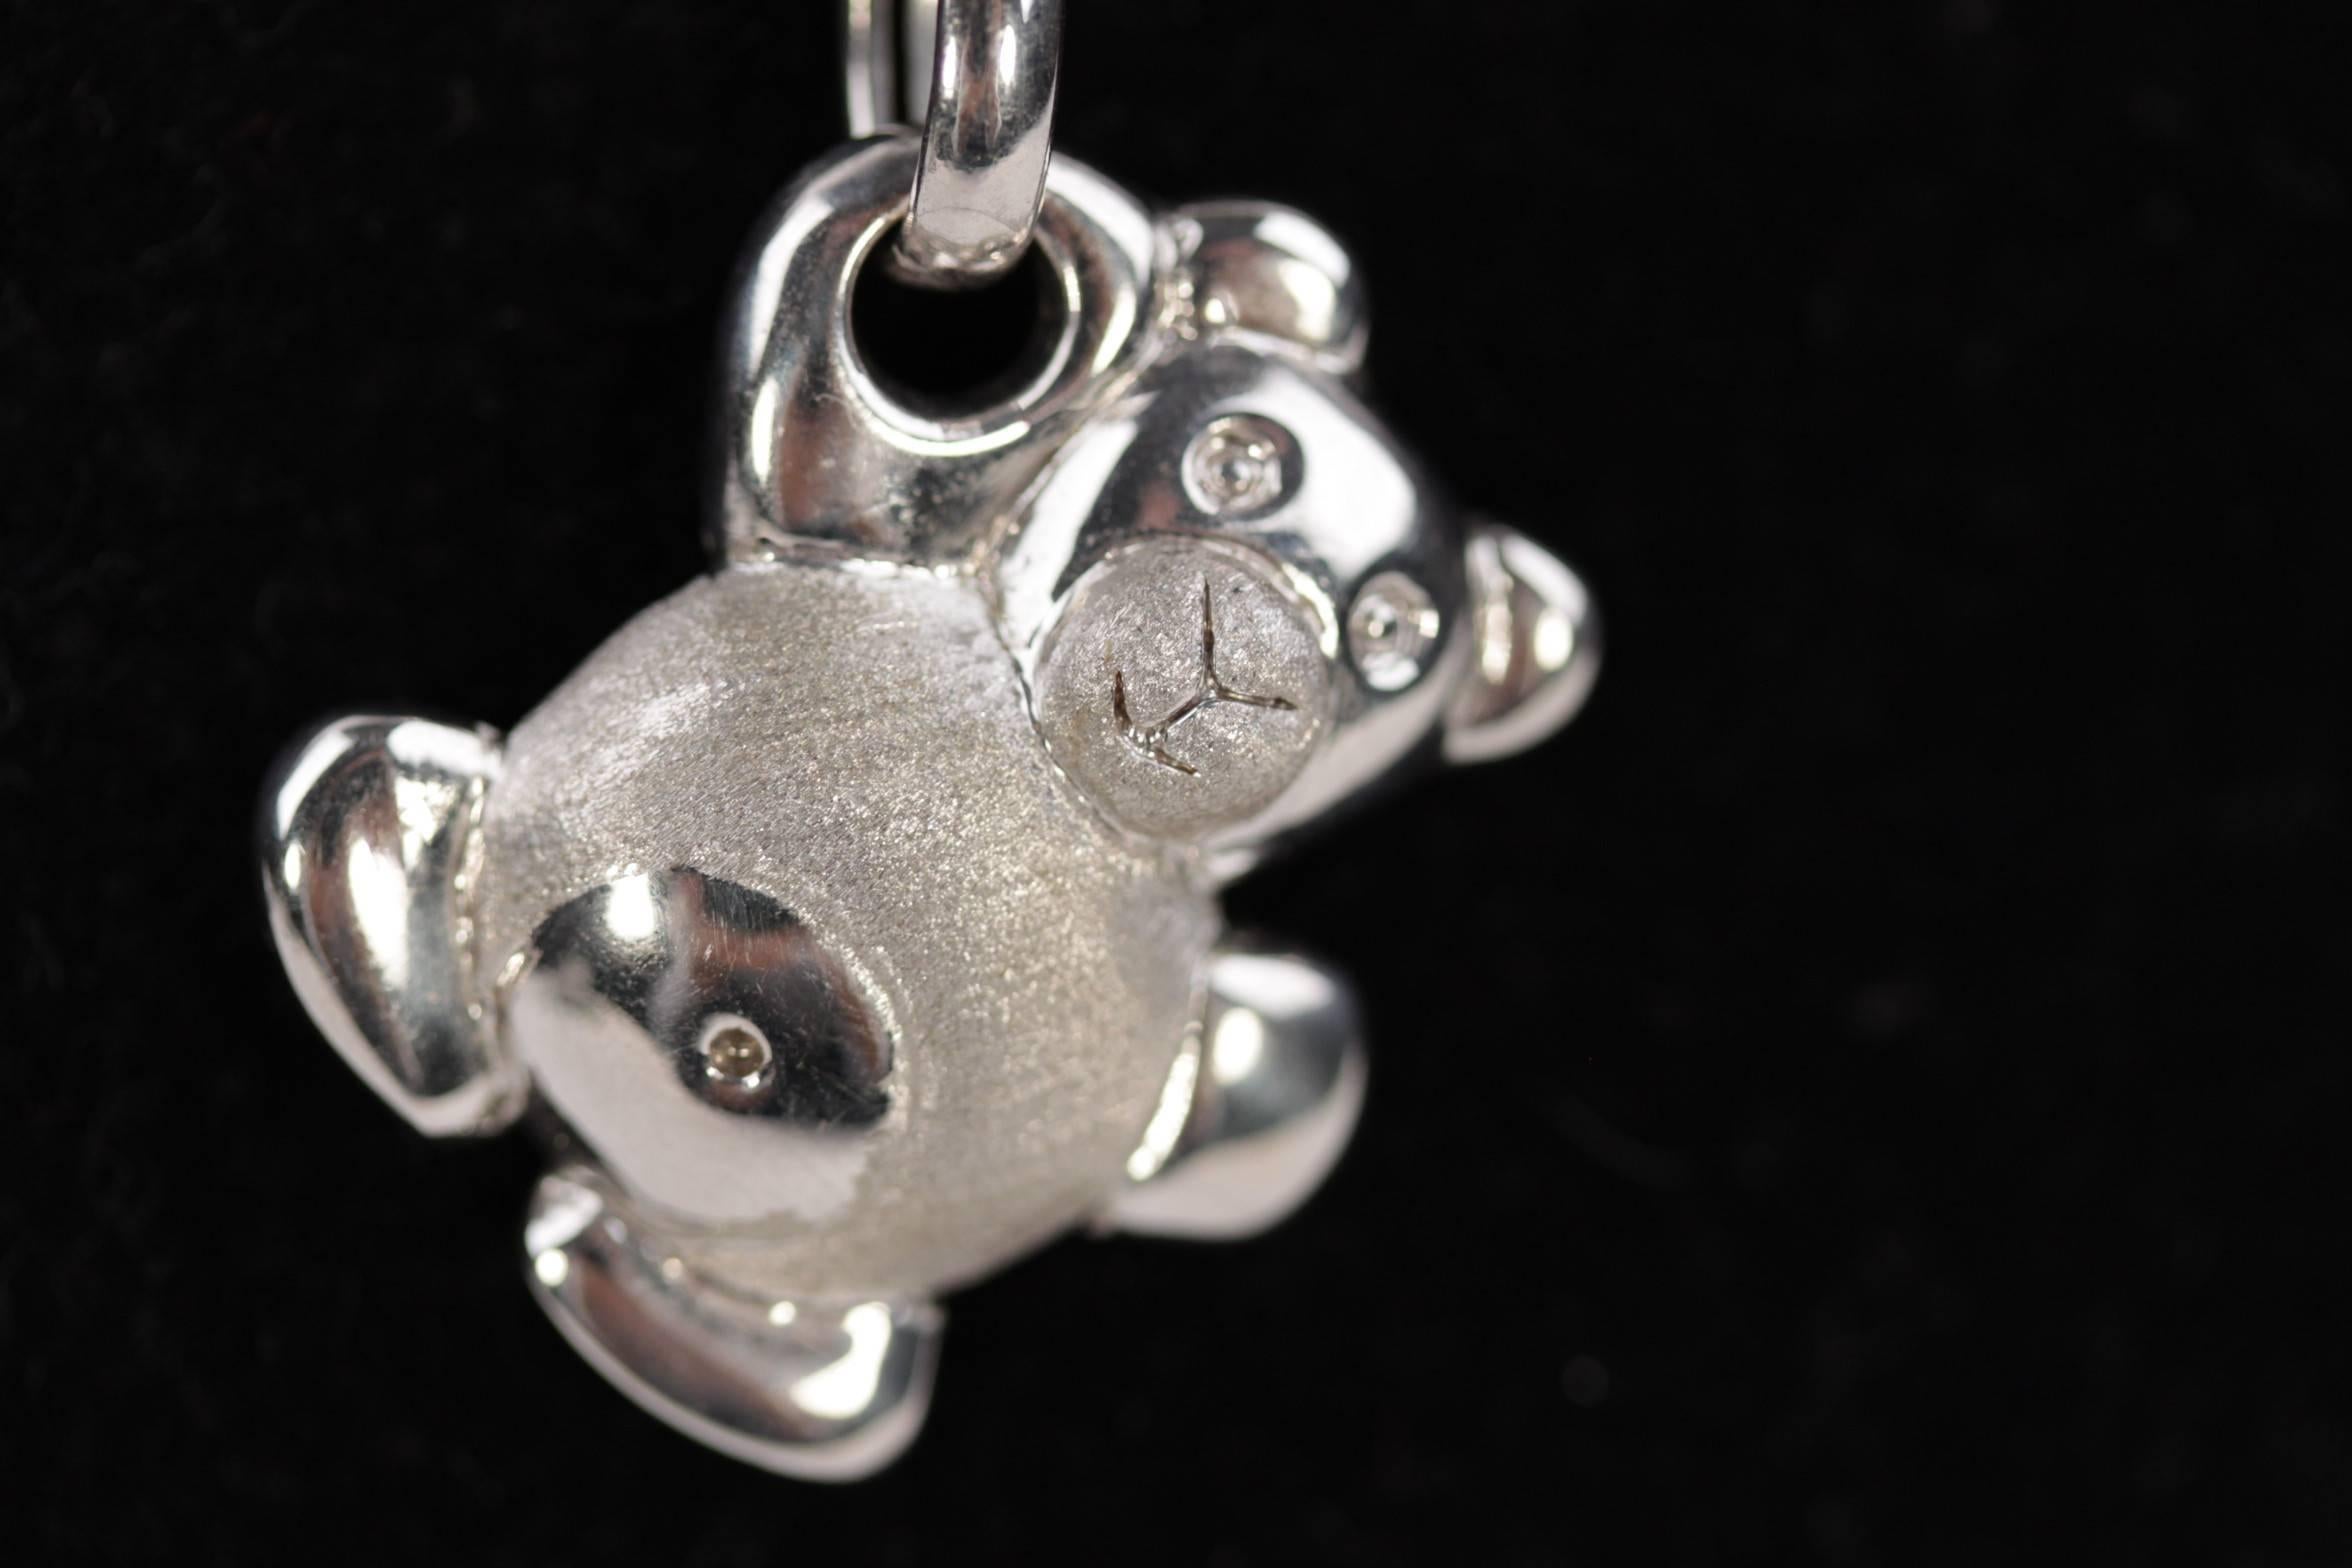 - Lovely necklace with a white gold teddy bear pendant signed RAFFA

- White gold '750' snake chain

- Clasp closure

- Engraved '750' hallmark on the chain and on the reverse of the pendant

- Total lenght: 17 inches - 43,2cm

- Pendant